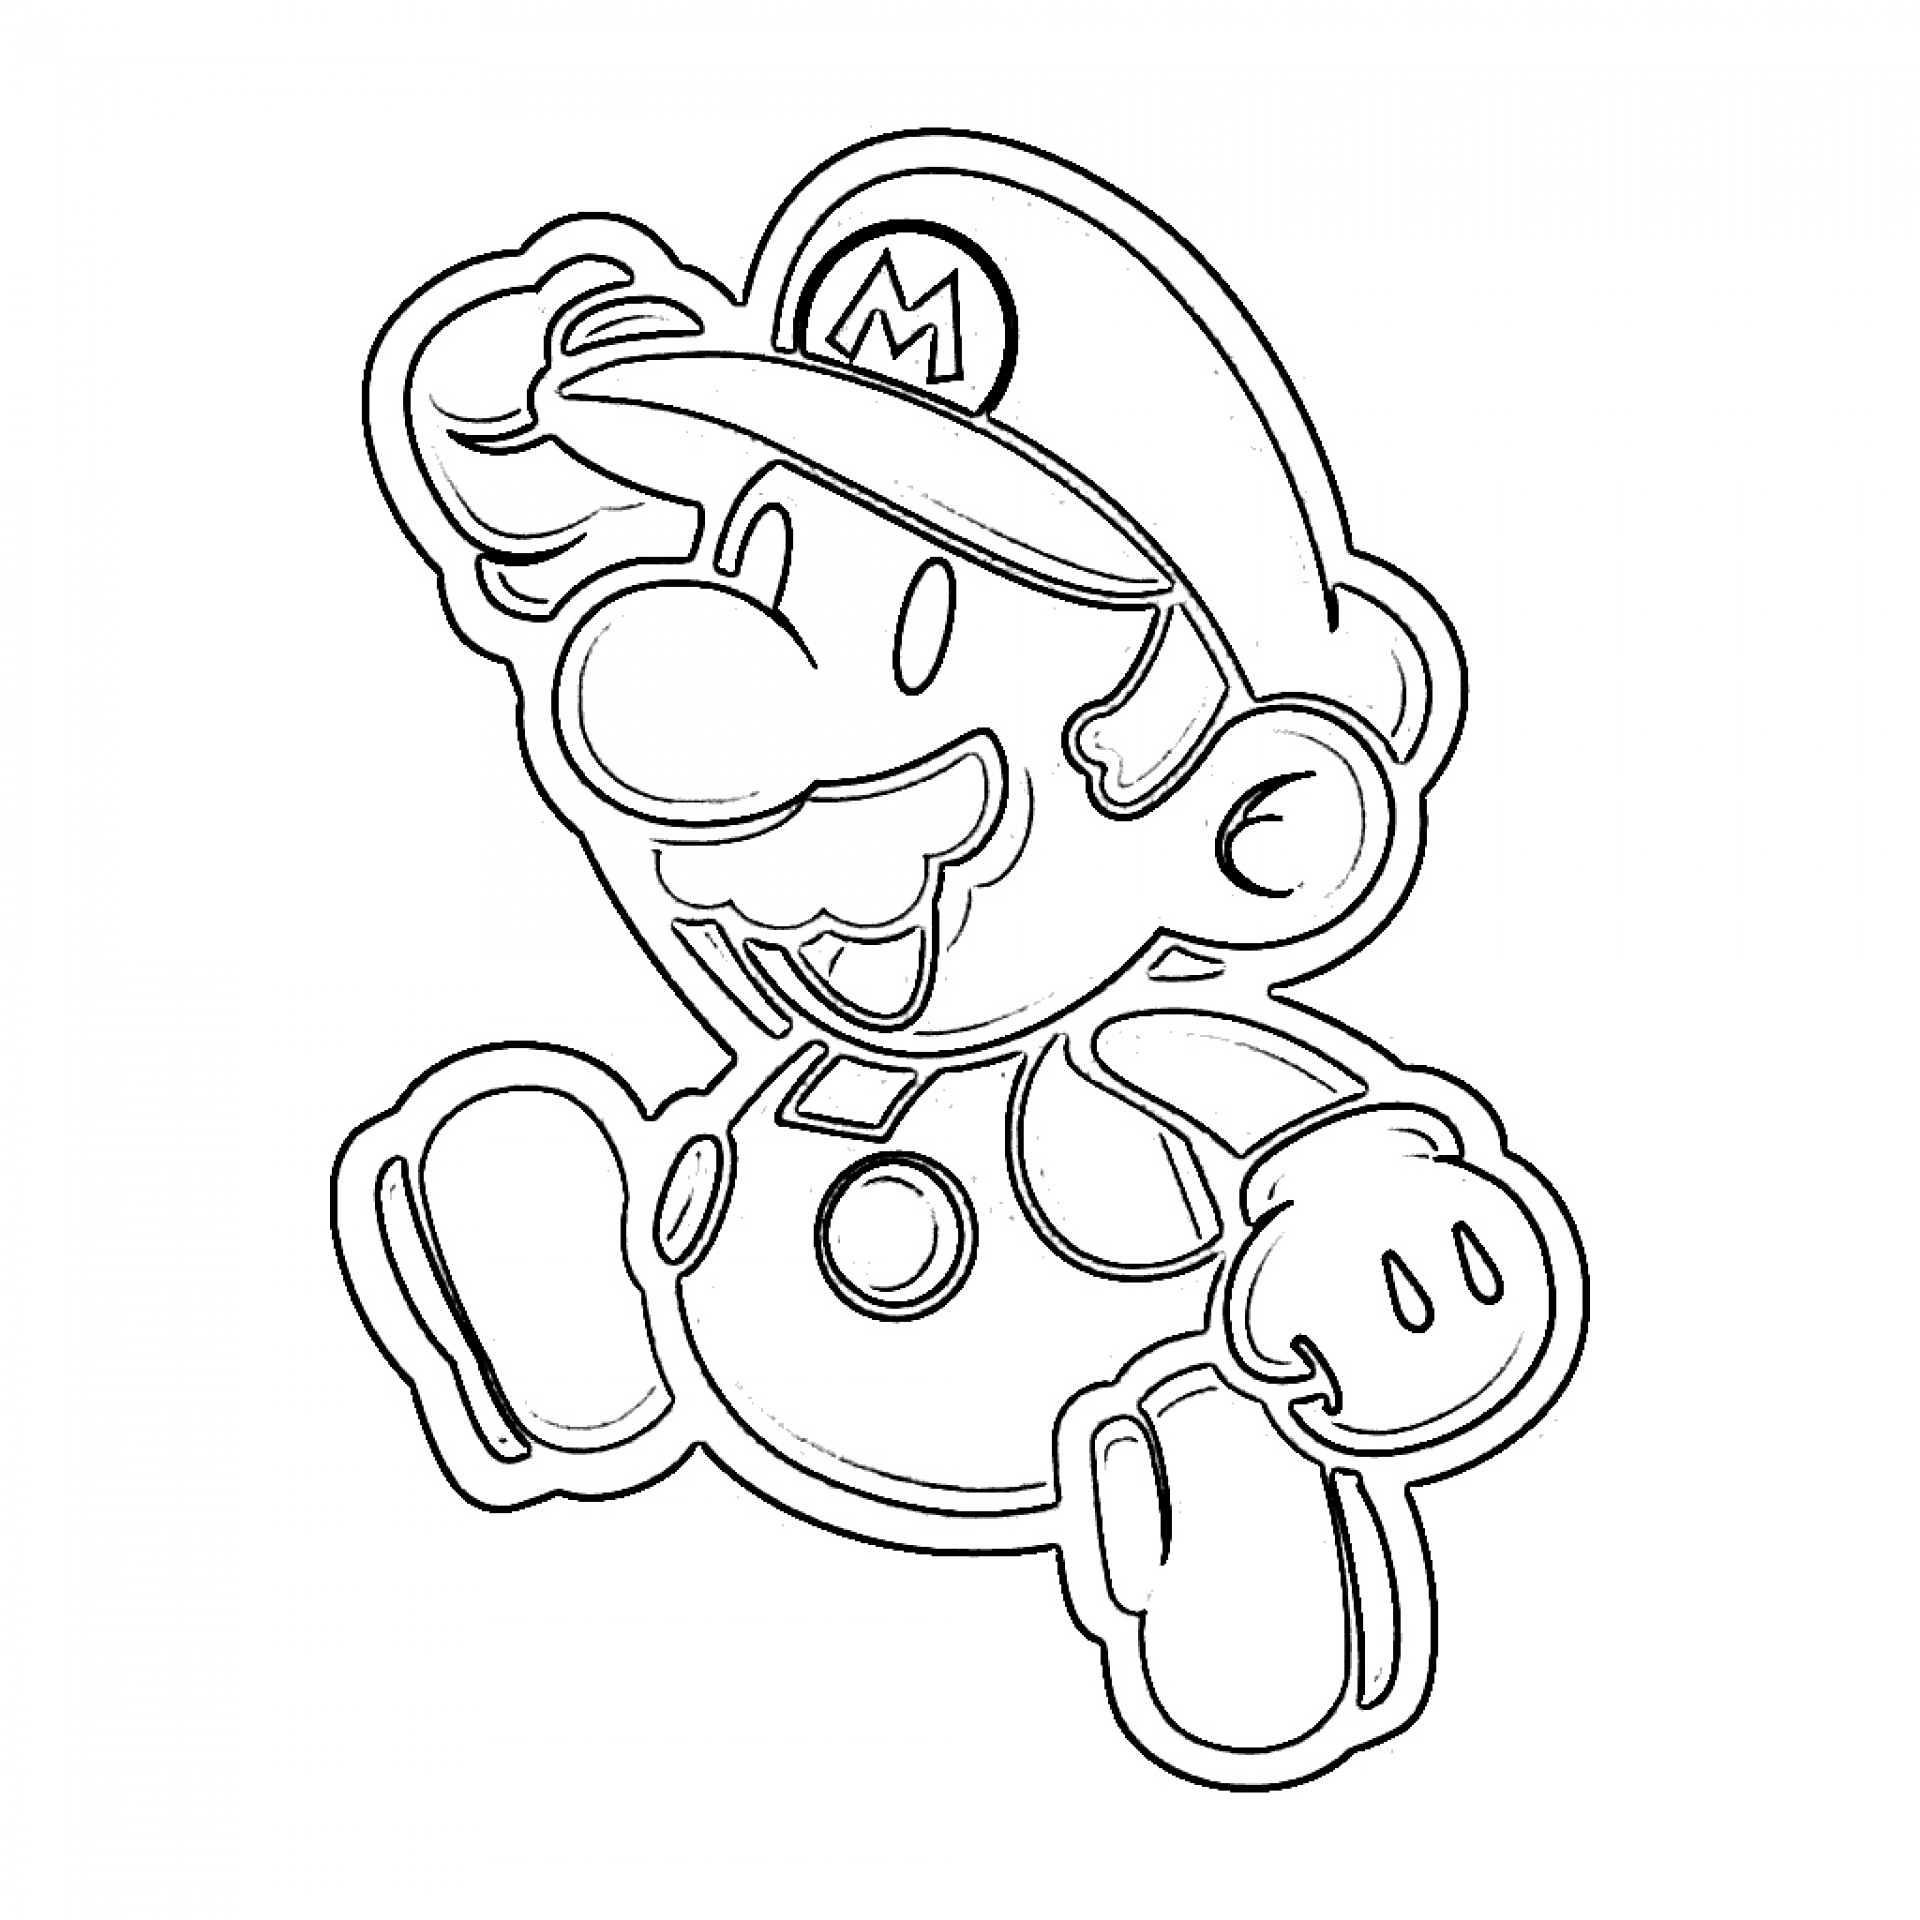  Super Mario Coloring Pages | Coloring pages for Kids | #39